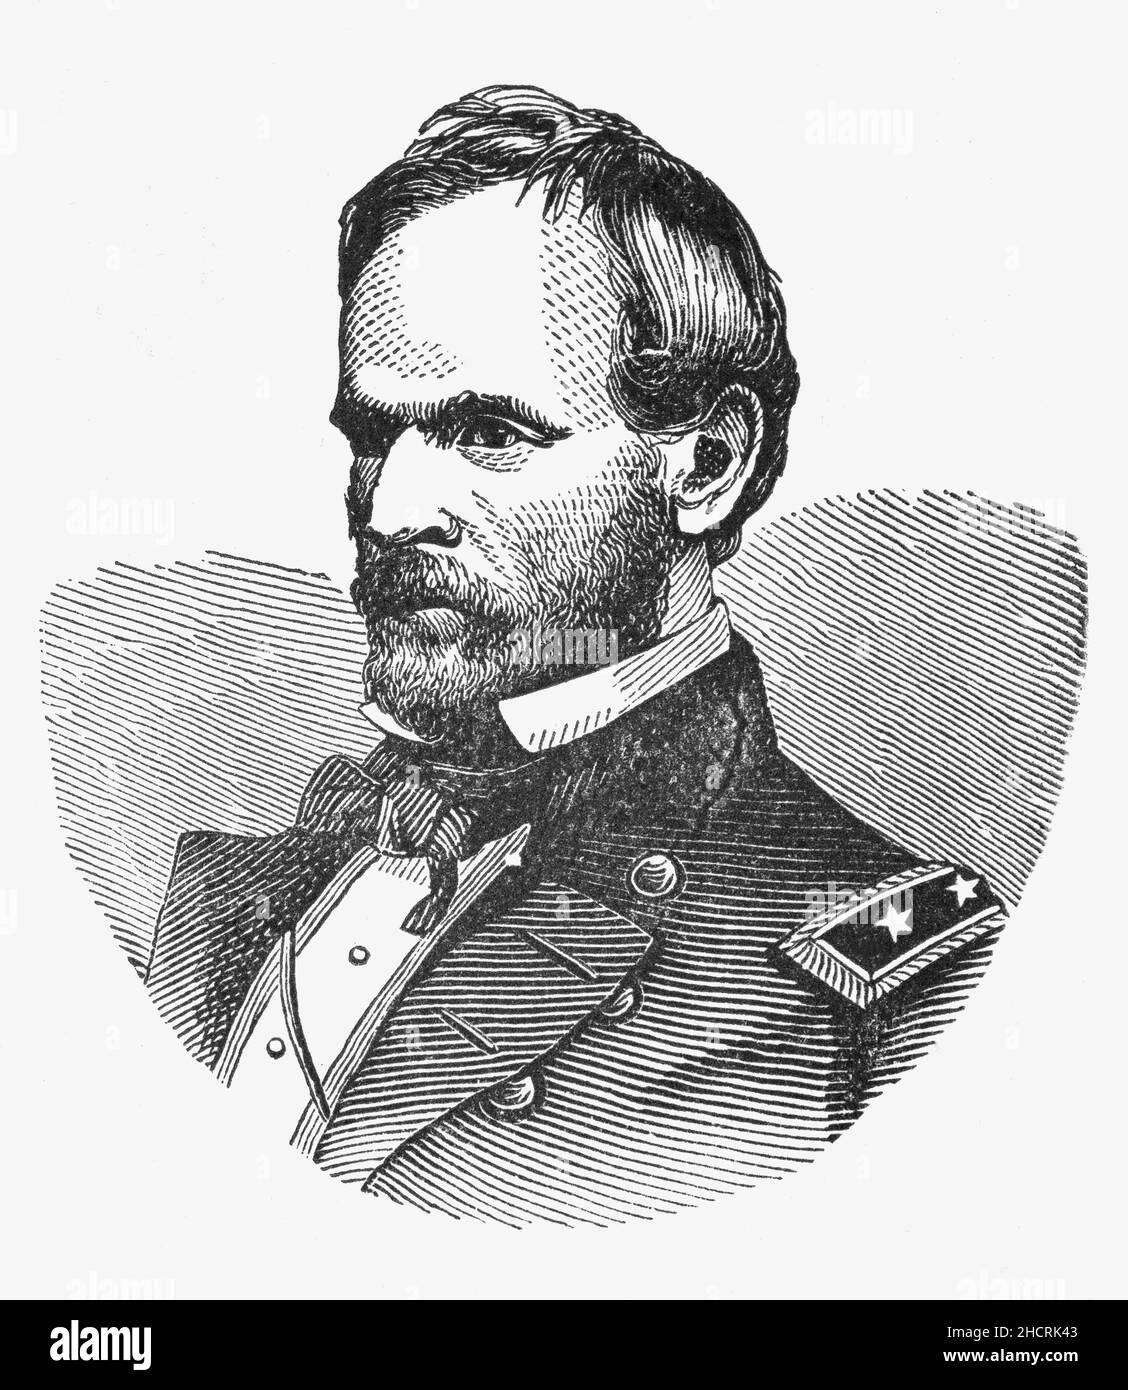 A late 19th Century portrait of William Tecumseh Sherman (1820-1891), an American soldier, businessman, educator, and author. He served as a general in the Union Army during the American Civil War (1861–1865), achieving recognition for his command of military strategy as well as criticism for the harshness of the scorched earth policies that he implemented against the Confederate States. The British military declared that Sherman was 'the first modern general'.  He was appointed Commanding General of the United States Army and promoted to the rank of full general. Stock Photo